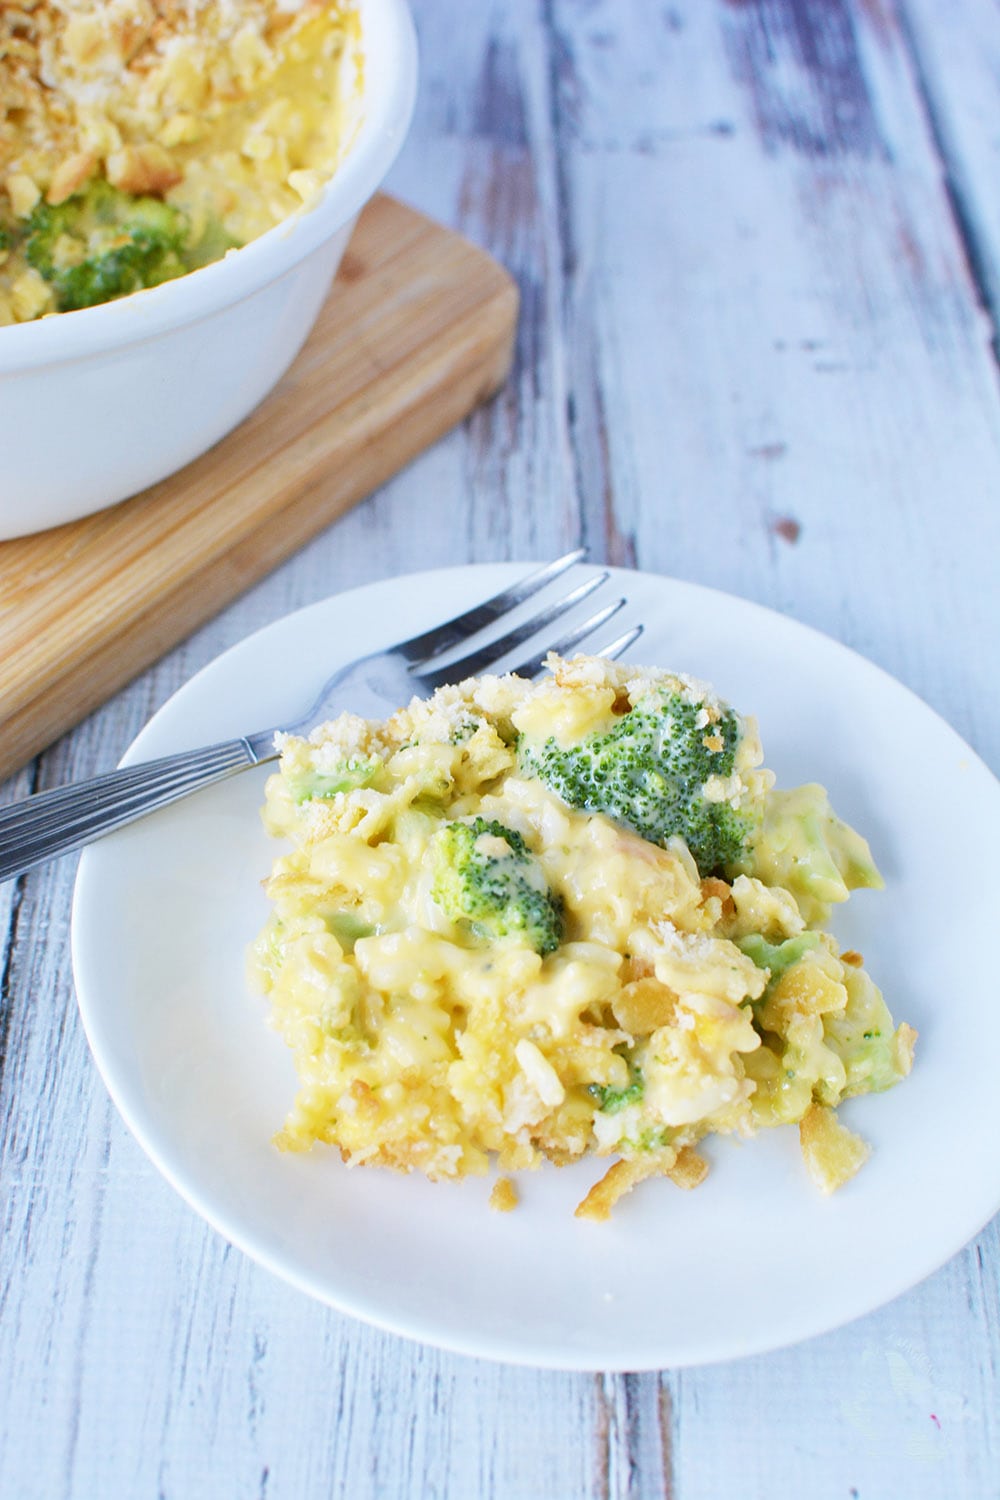 Broccoli and cheese casserole with cracker topping